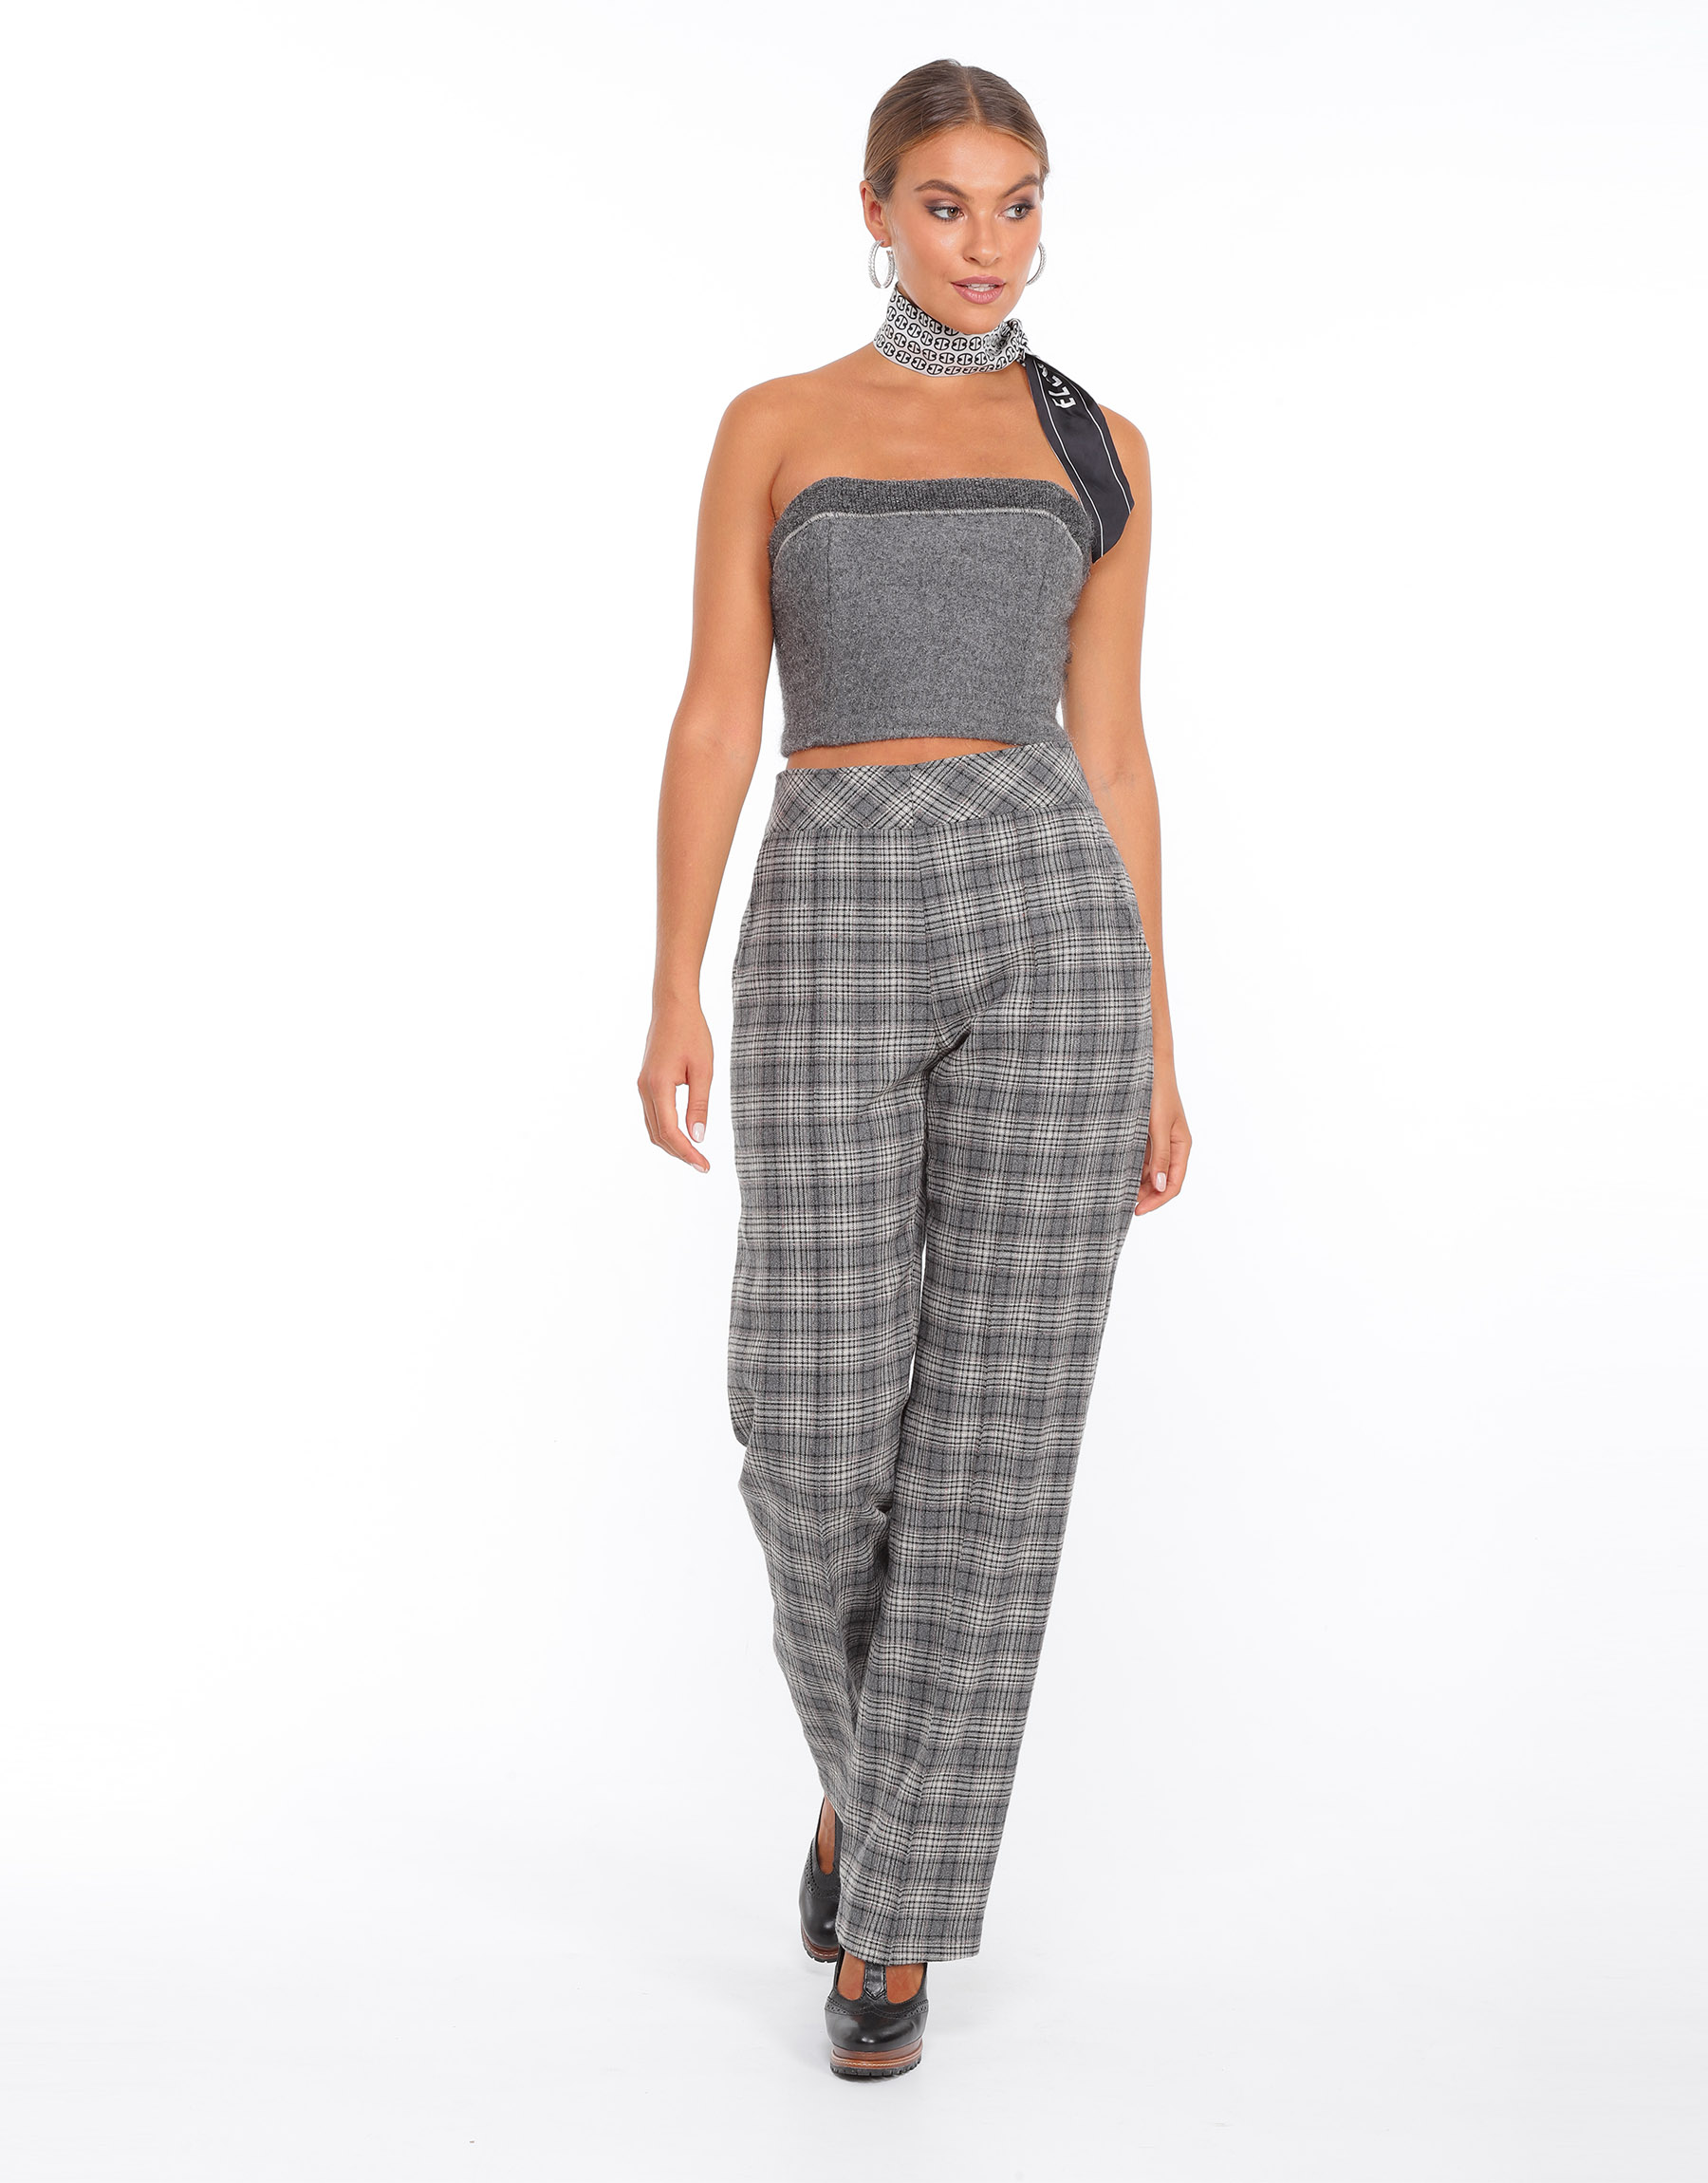 High-waisted straight wool trousers with grey, black and white checkered